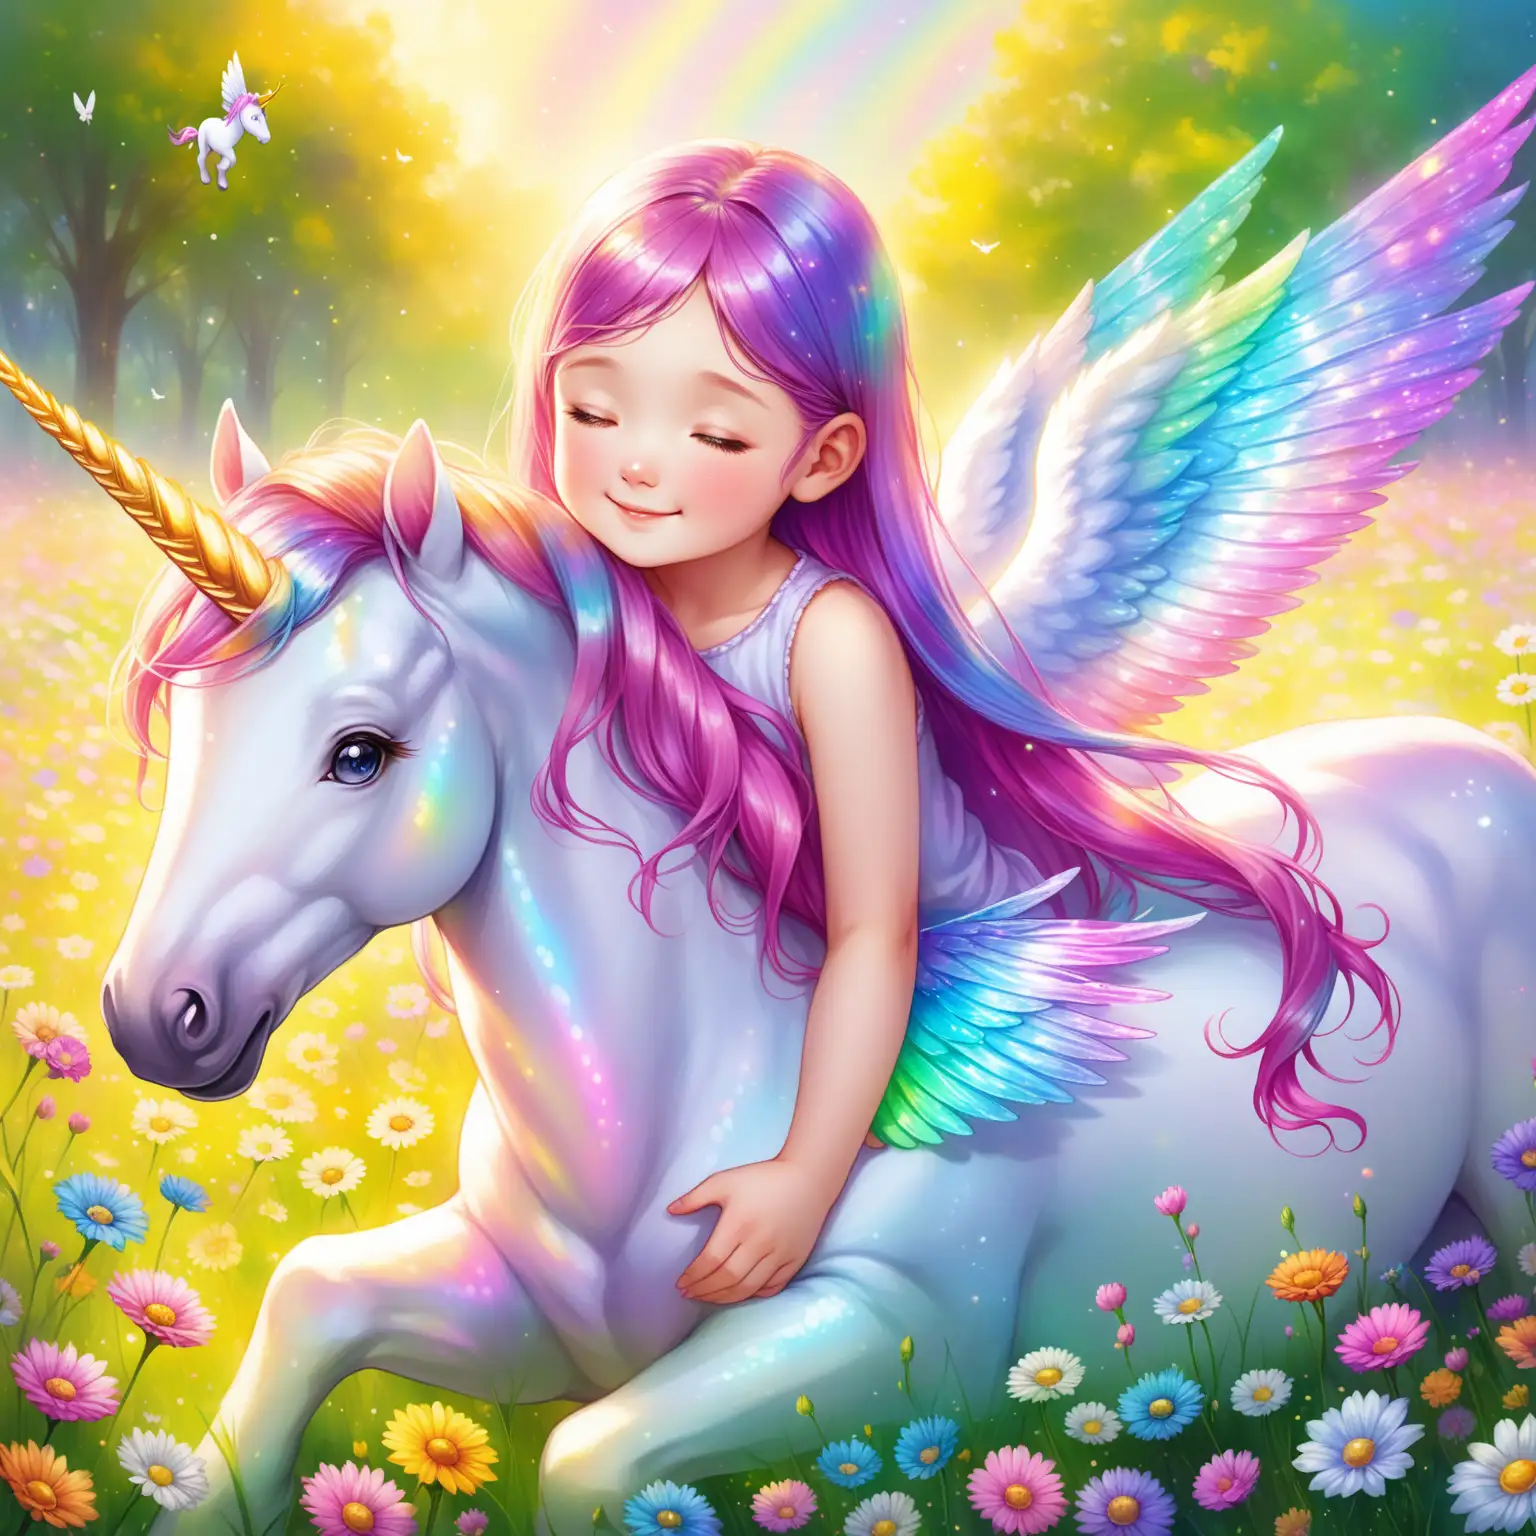 A vibrant and colorful realistic typical  downs  syndrome girl she has long colourful hair she is  happy with iridescent wings and she is in a meadow of flowers playing with her pet unicorn